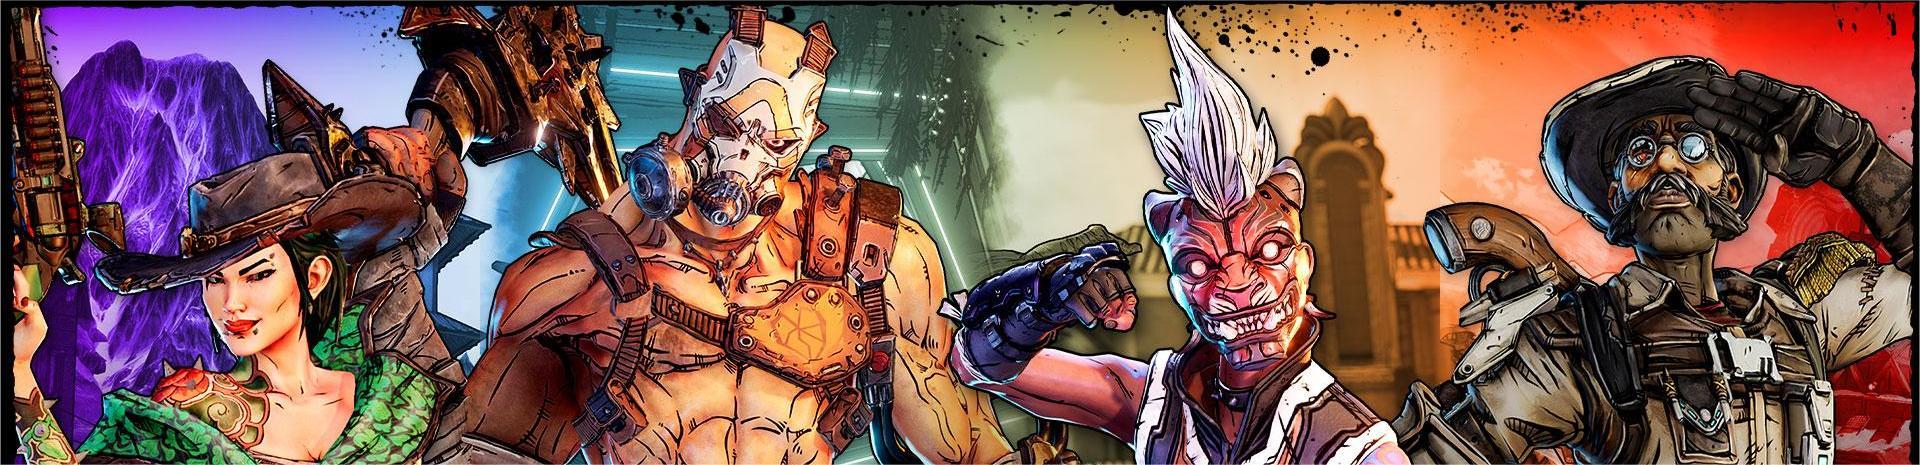 Buy Borderlands 3 Weapons,Cheap and Safe Borderlands 3 Weapons on Sale at FarmGolds.com